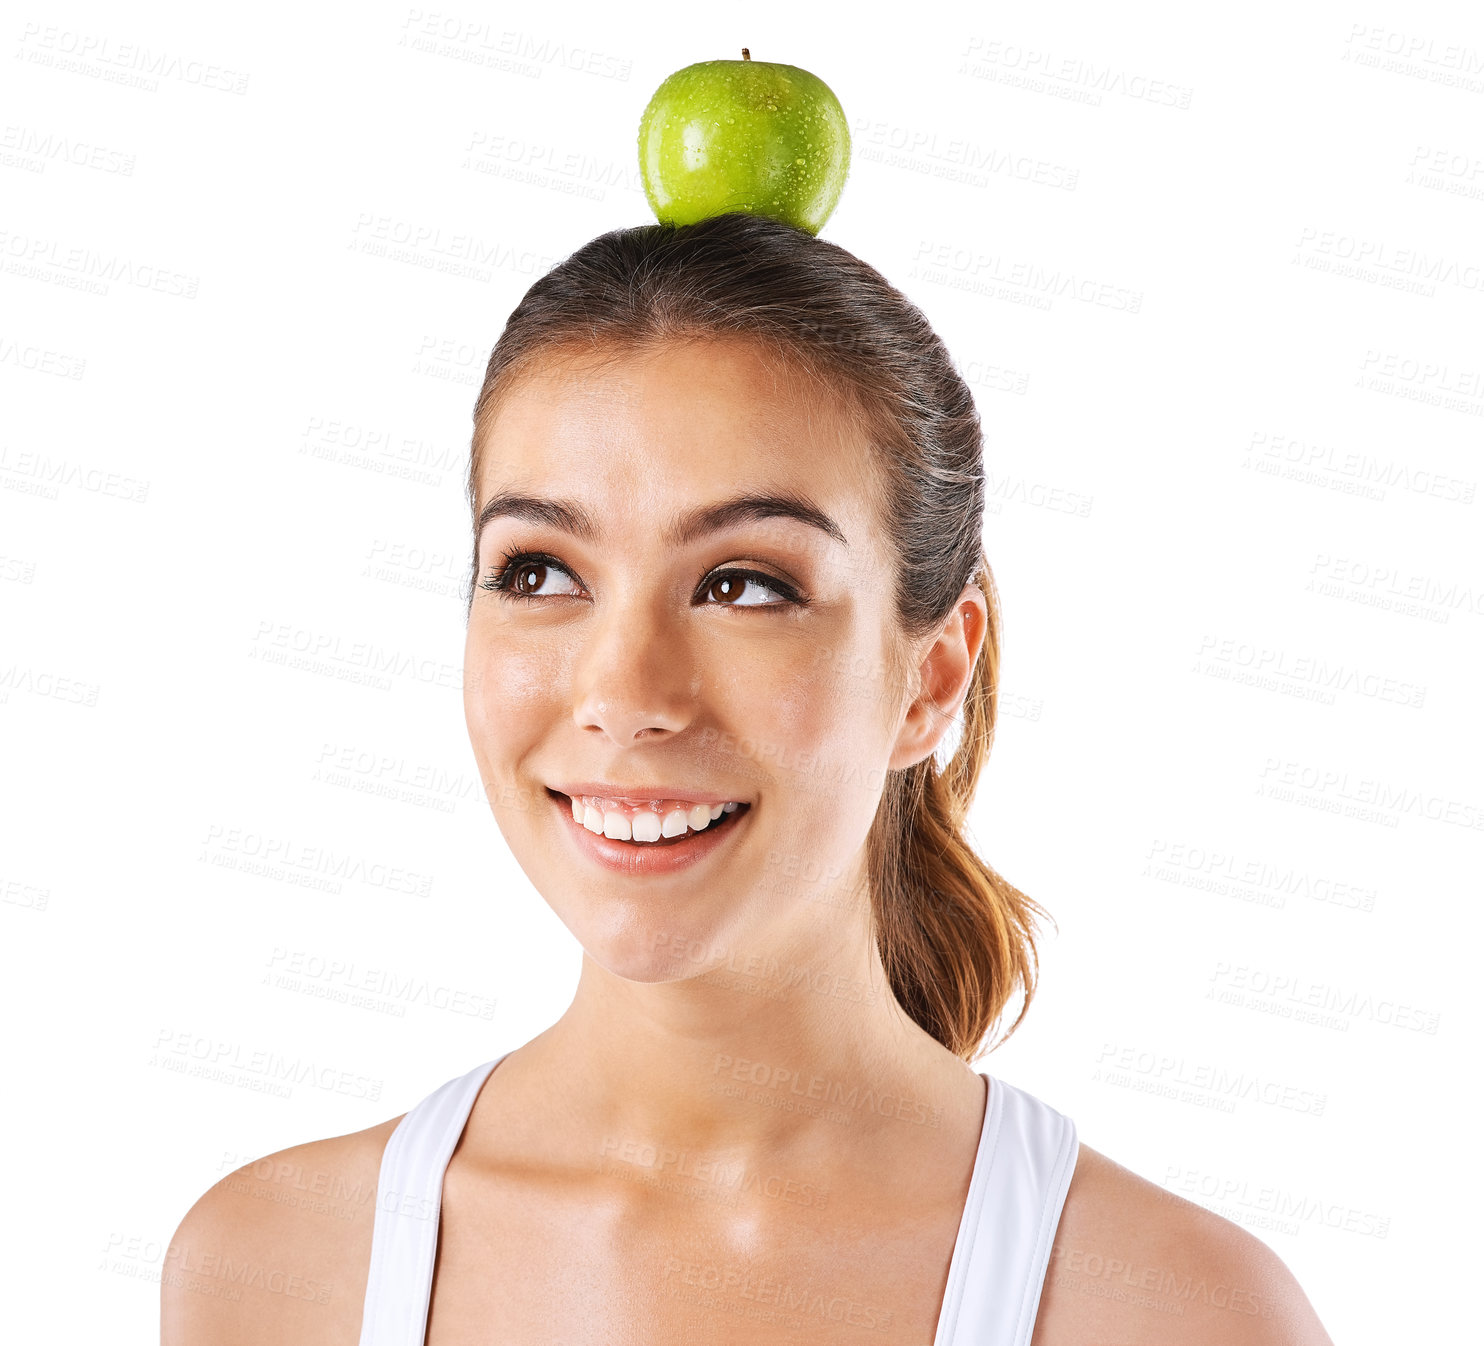 Buy stock photo Cropped shot of a woman posing with an apple on her head